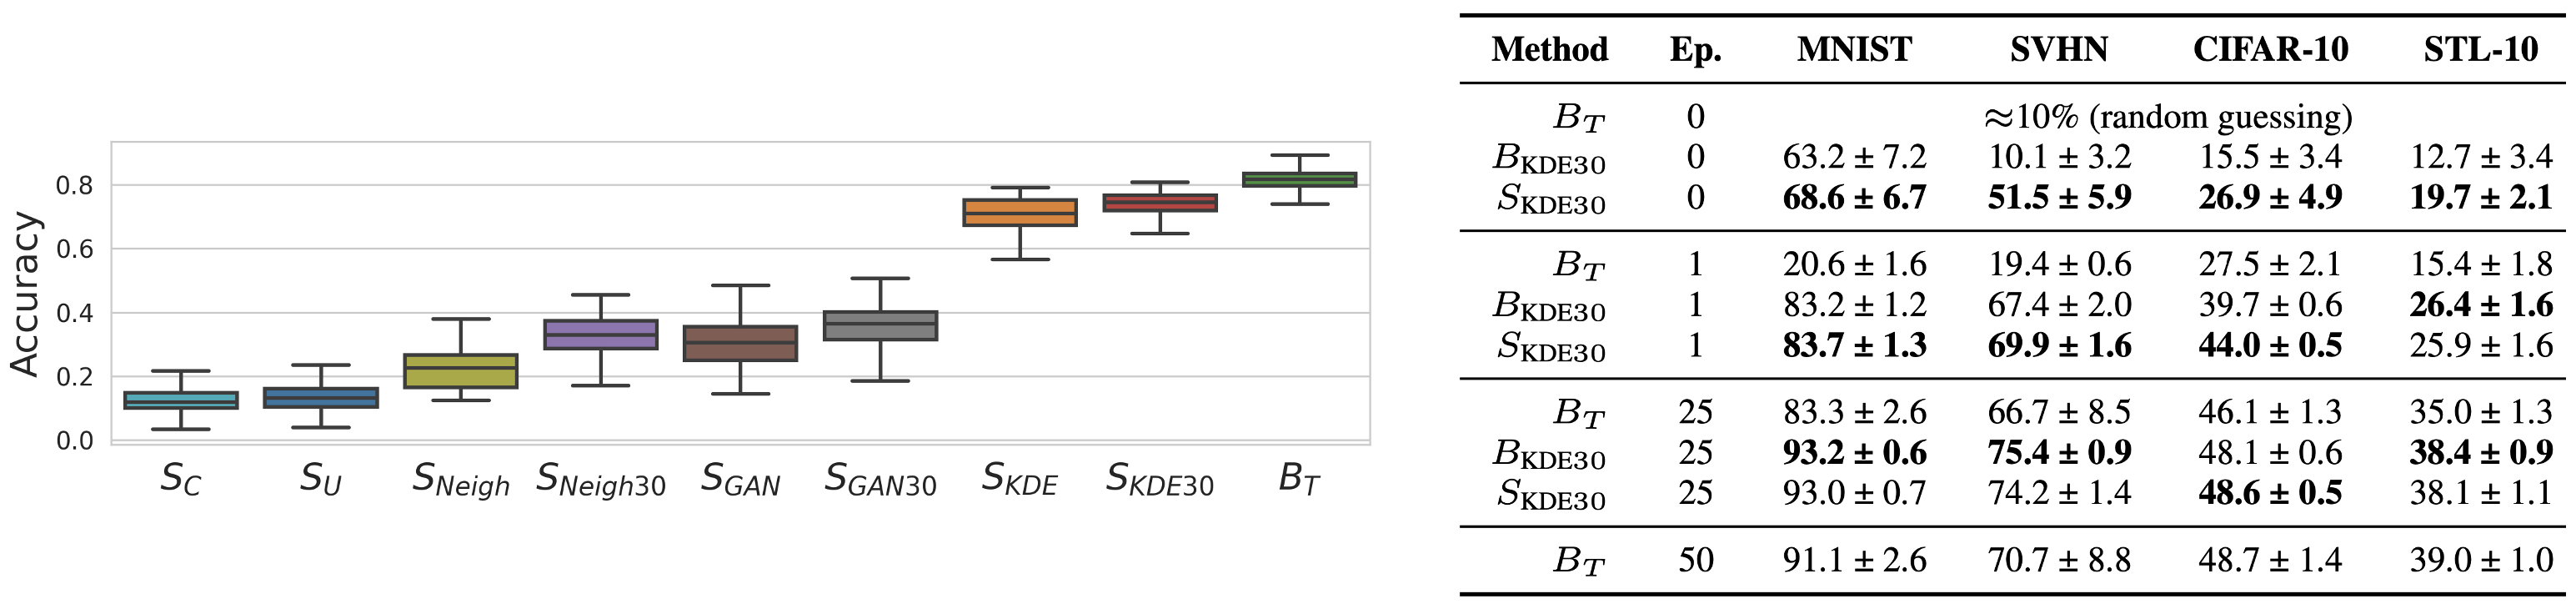 
Left: Accuracy comparison of different sampling methods. By choosing different methods, accuracy brackets can be targeted. Right: Accuracy of populations during fine-tuning. Sampled populations $S_{KDE30}$ after a single epoch often outperforms the baselines with considerable more epochs.
